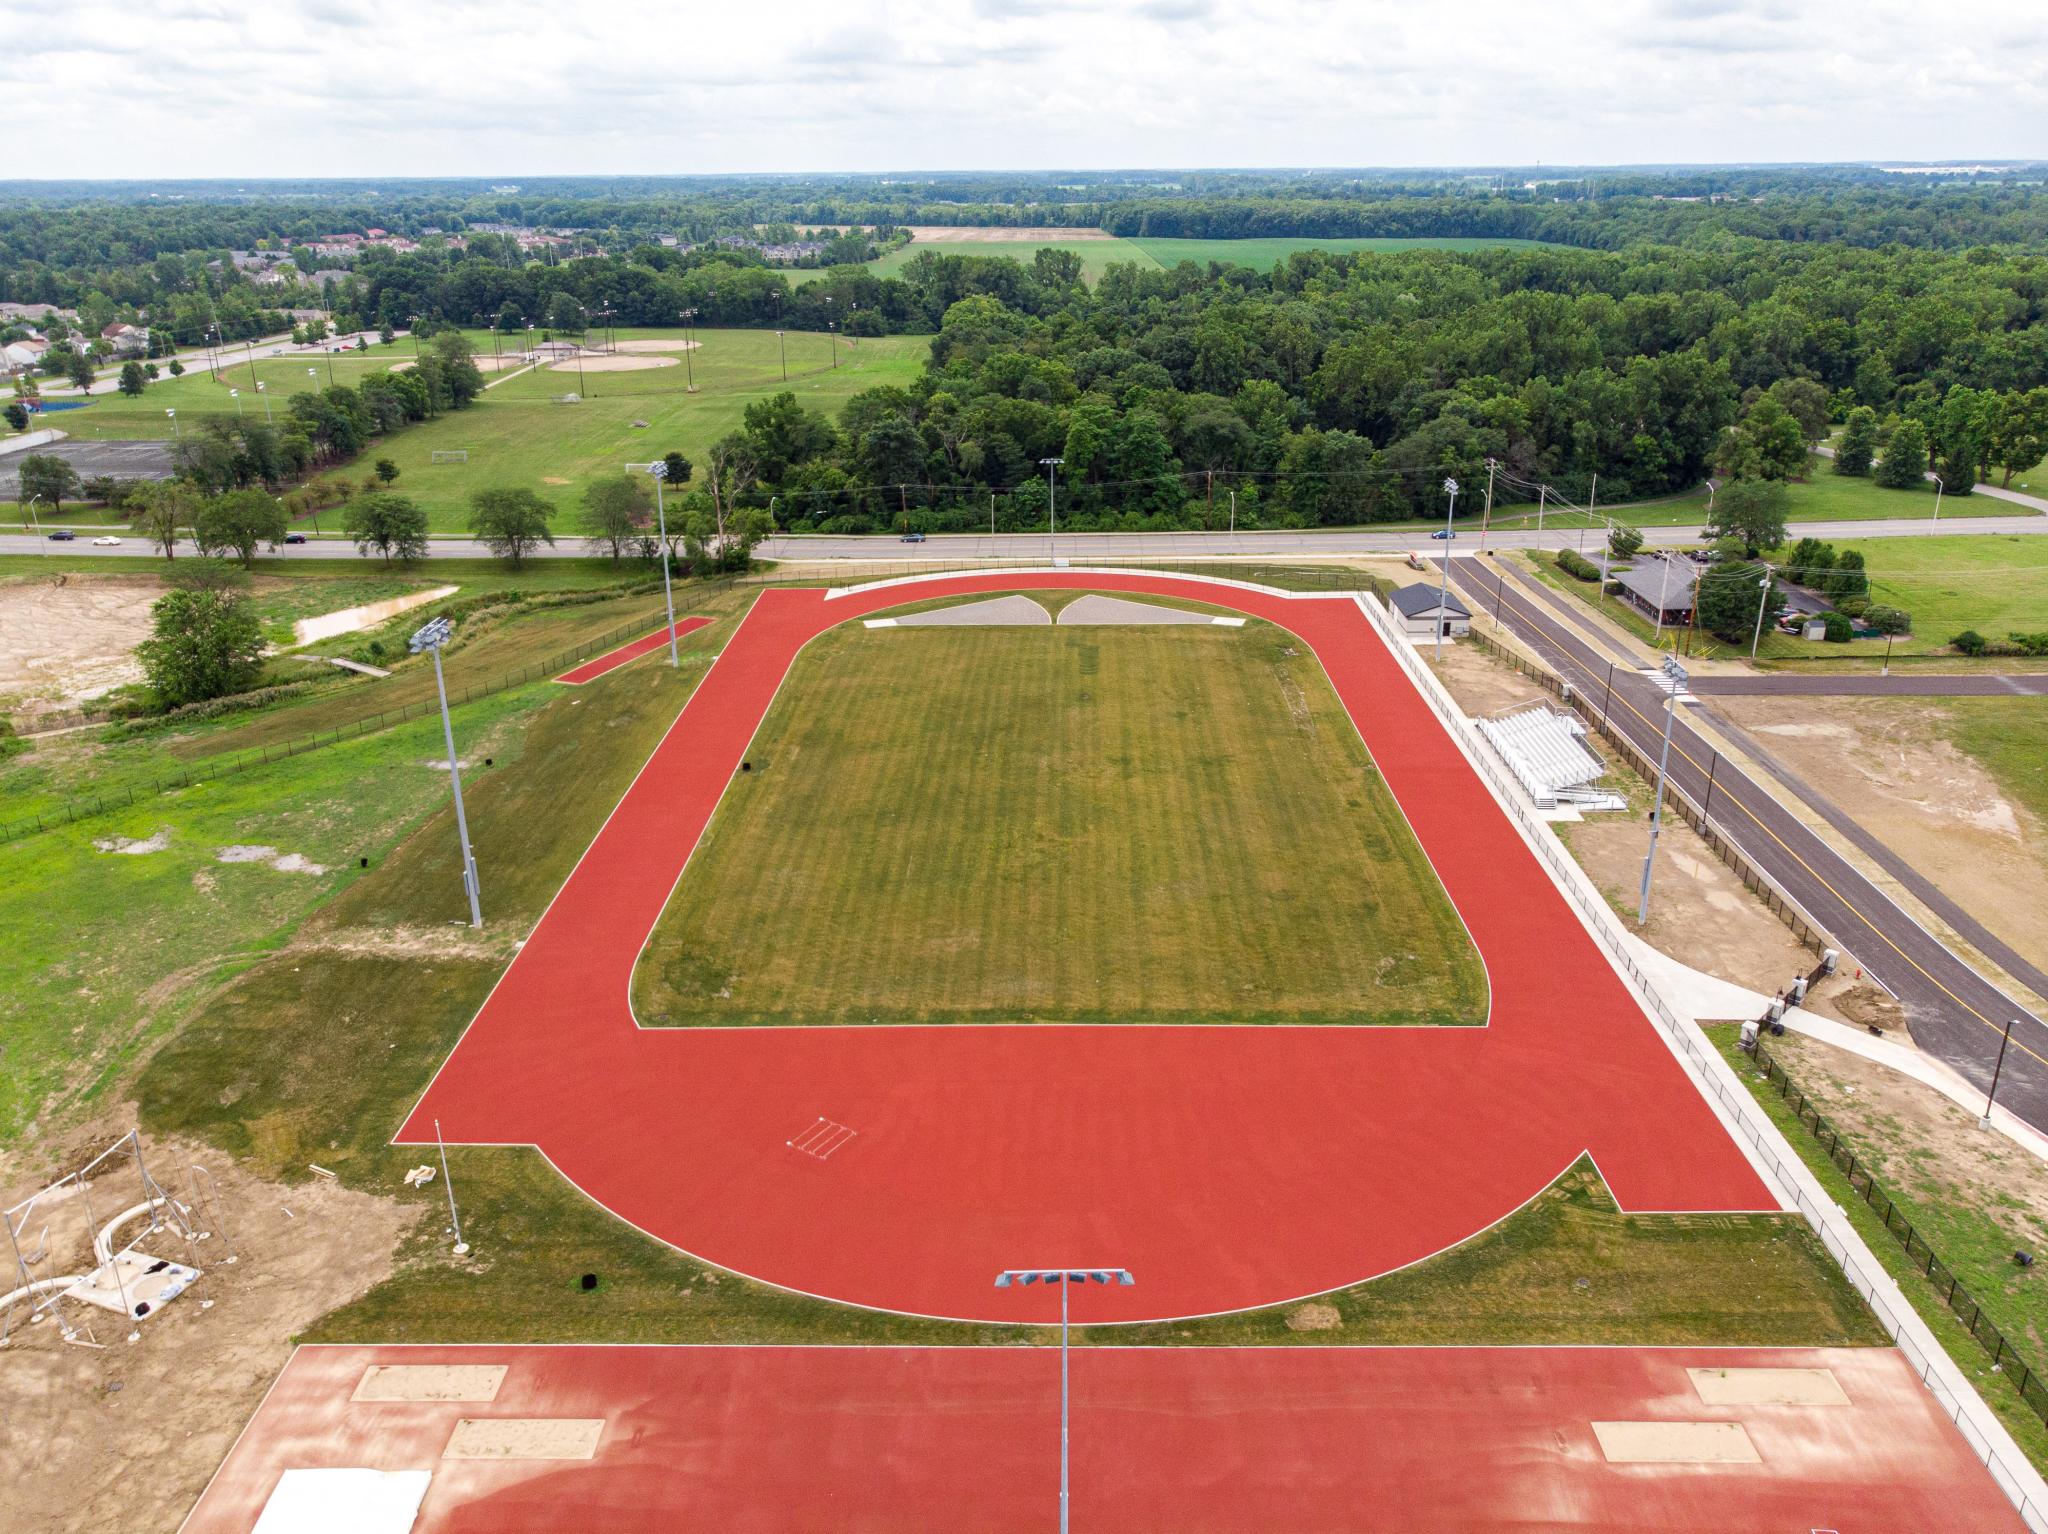 aerial image of a track & field event field